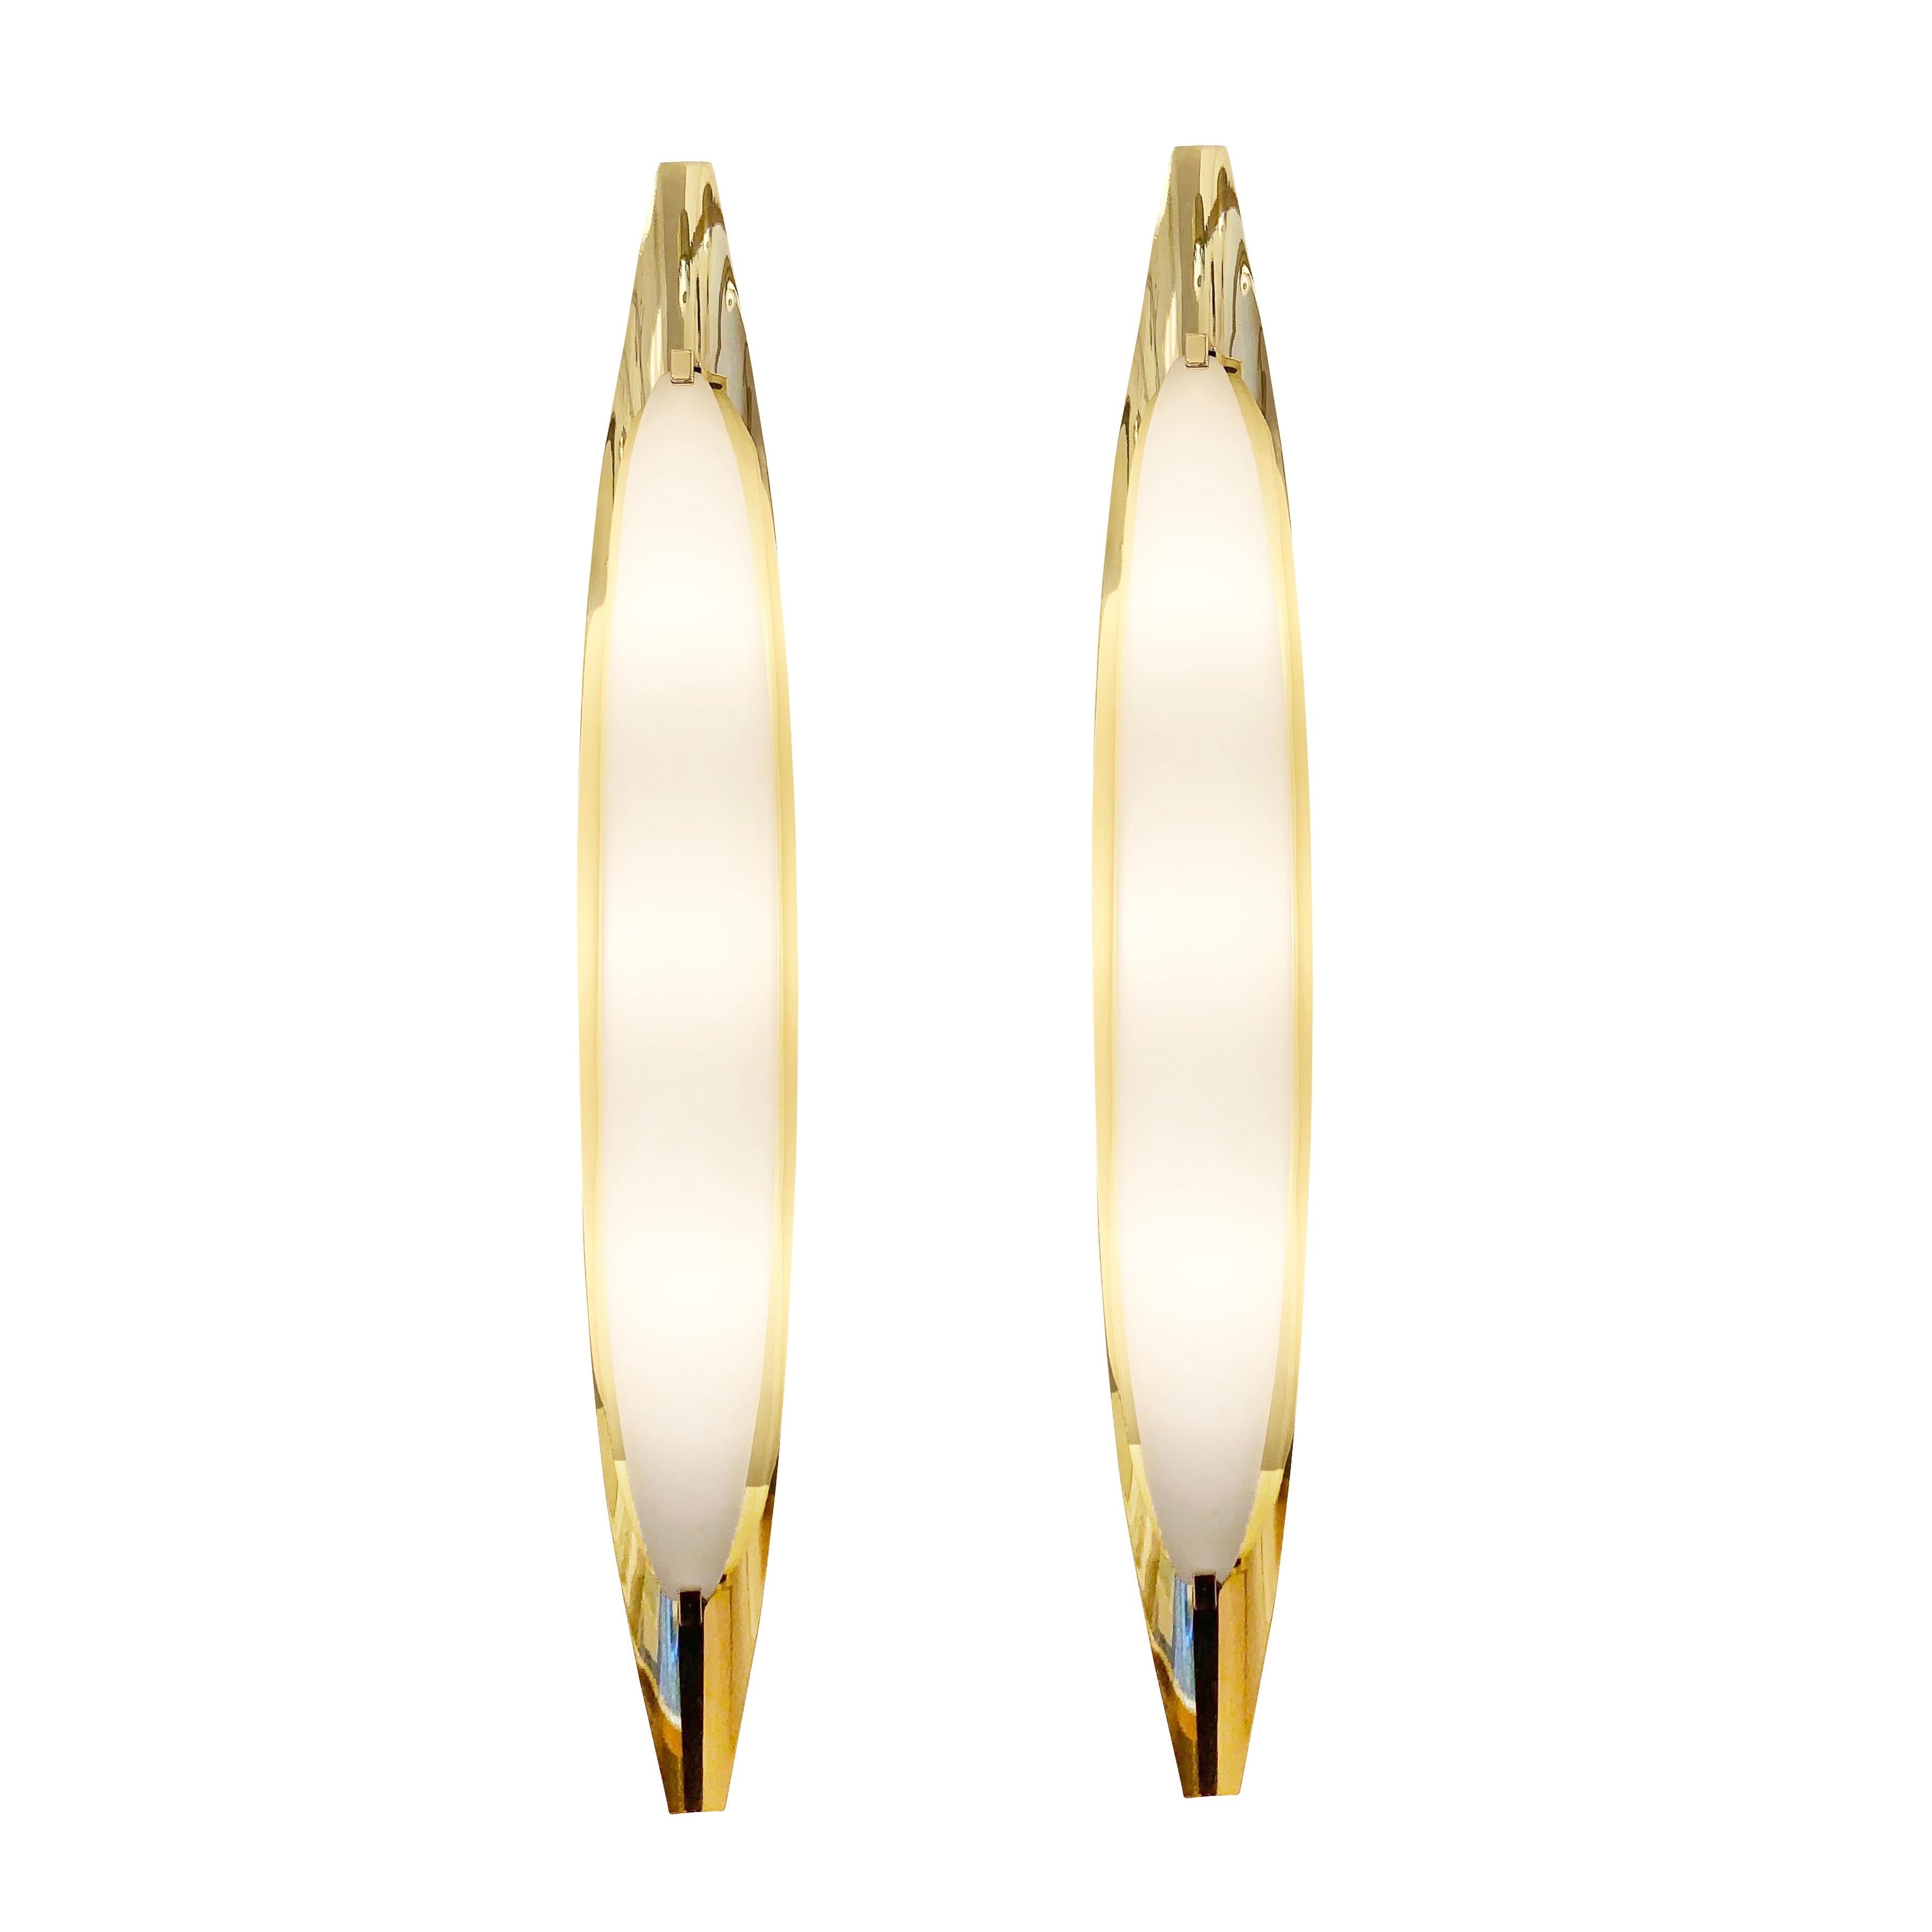 Fontana Arte Wall Lights 2254 Model by Max Ingrand
$11,900.00
Elongated wall lights model 2254 designed by Max Ingrand for Fontana Arte in the 1960s. The polished brass frame features a frosted glass diffuser concealing three light